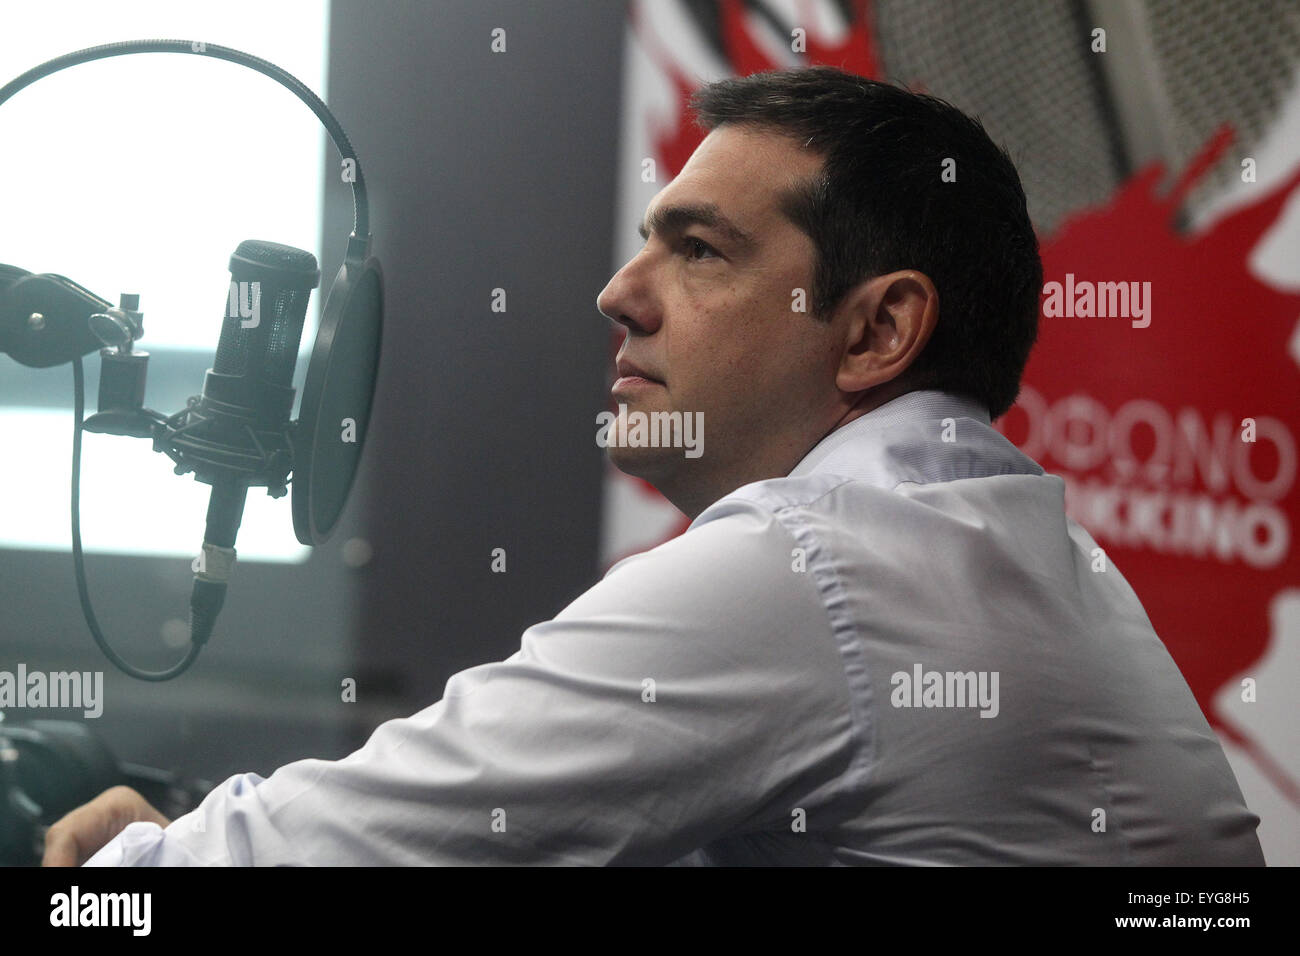 Athens, Greece. 29th July, 2015. Greek Prime Minister Alexis Tsipras receives an interview at a radio station, Athens, Greece, July 29, 2015. Tsipras has launched a communication campaign to clarify why Greek government accepted the new bailout terms. Credit:  Marios Lolos/Xinhua/Alamy Live News Stock Photo